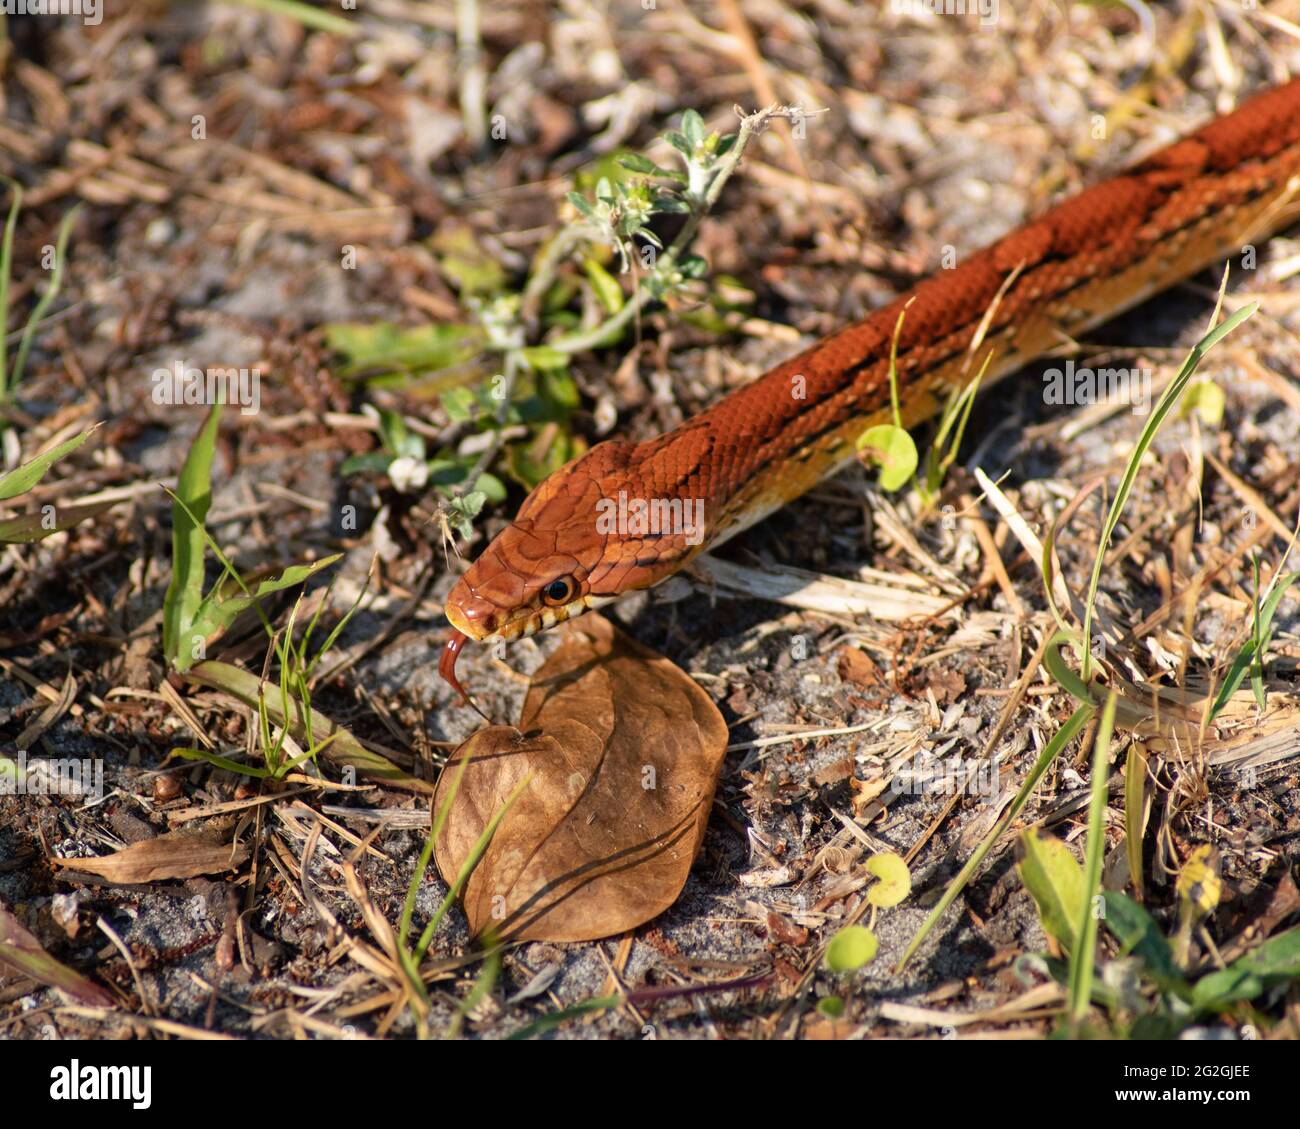 Corn snake pantherophis guttatus.  A North American species of a rat snake. Beneficial to humans as pest control. Stock Photo